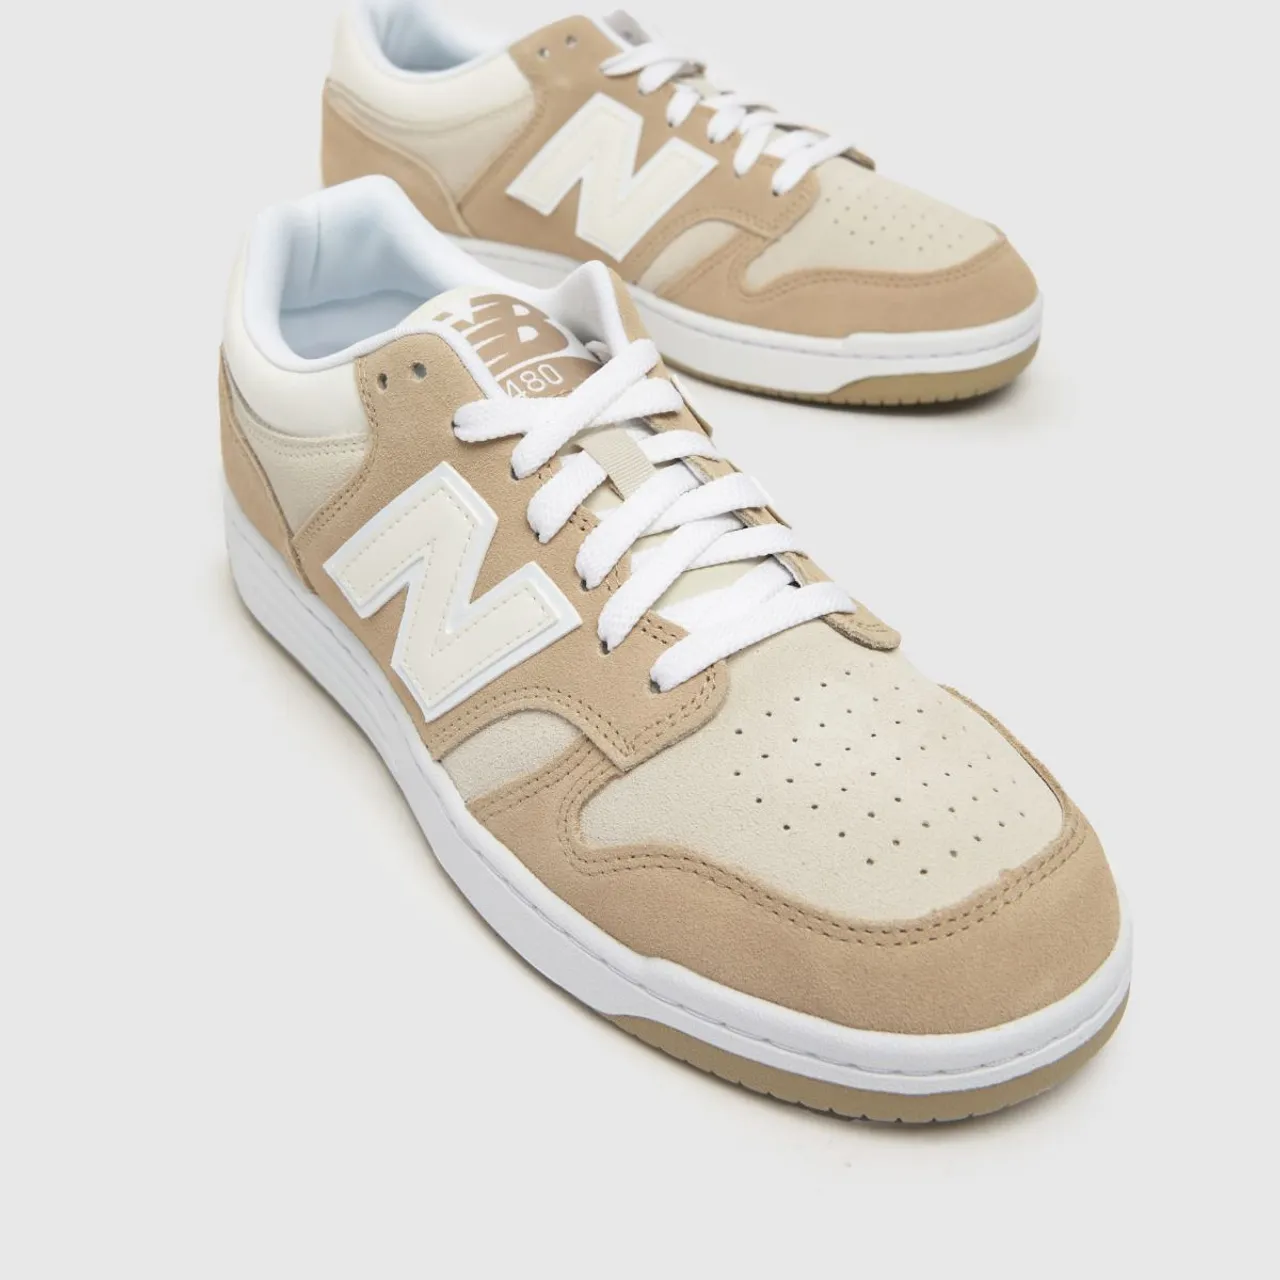 New Balance 480 Trainers in White & Beige